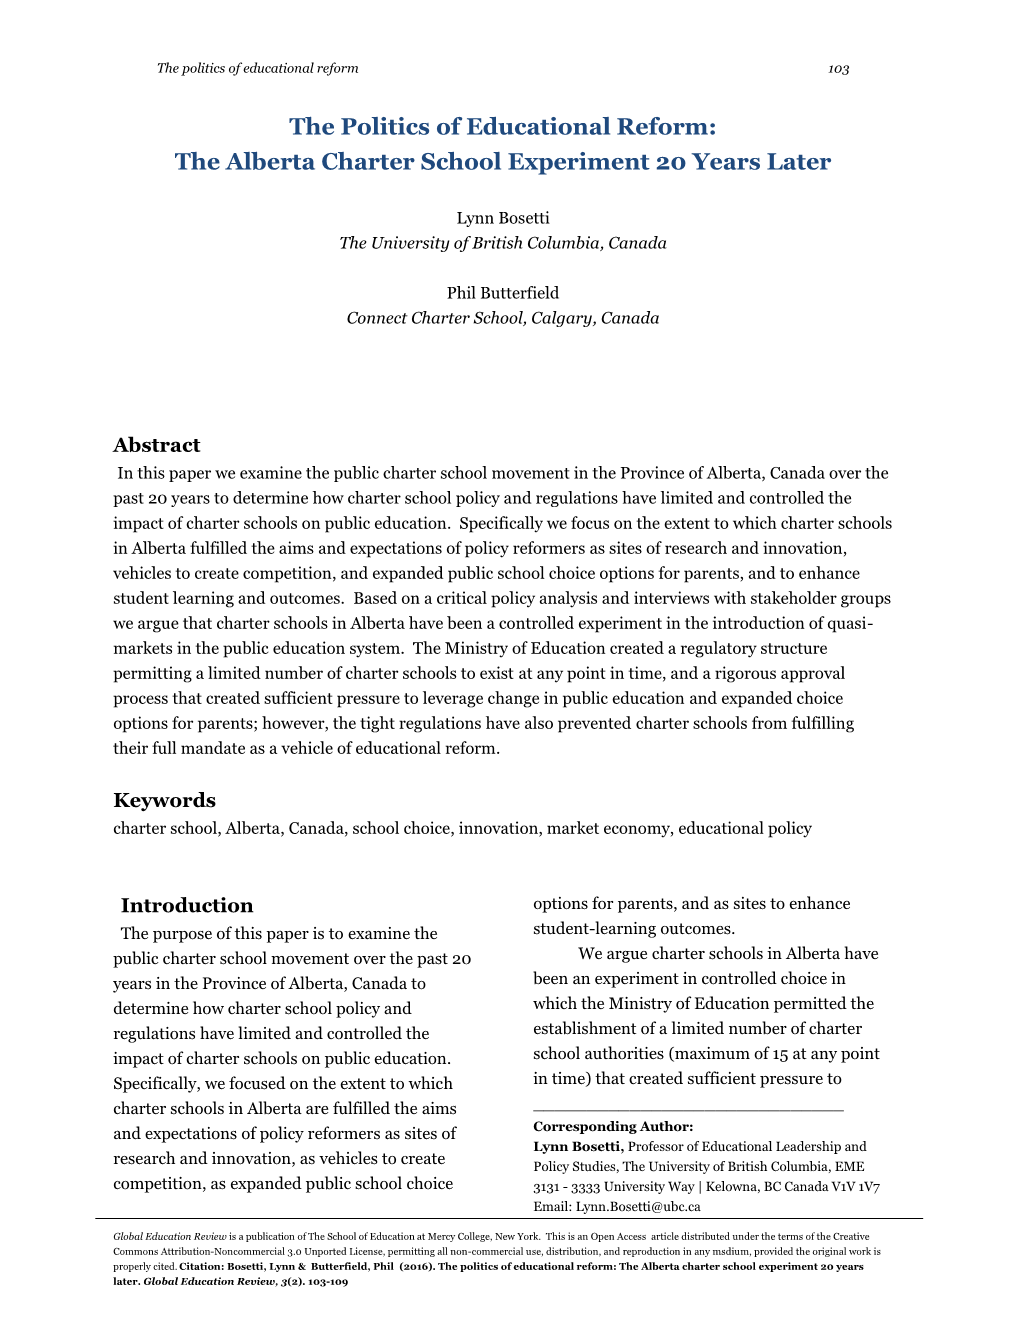 The Alberta Charter School Experiment 20 Years Later